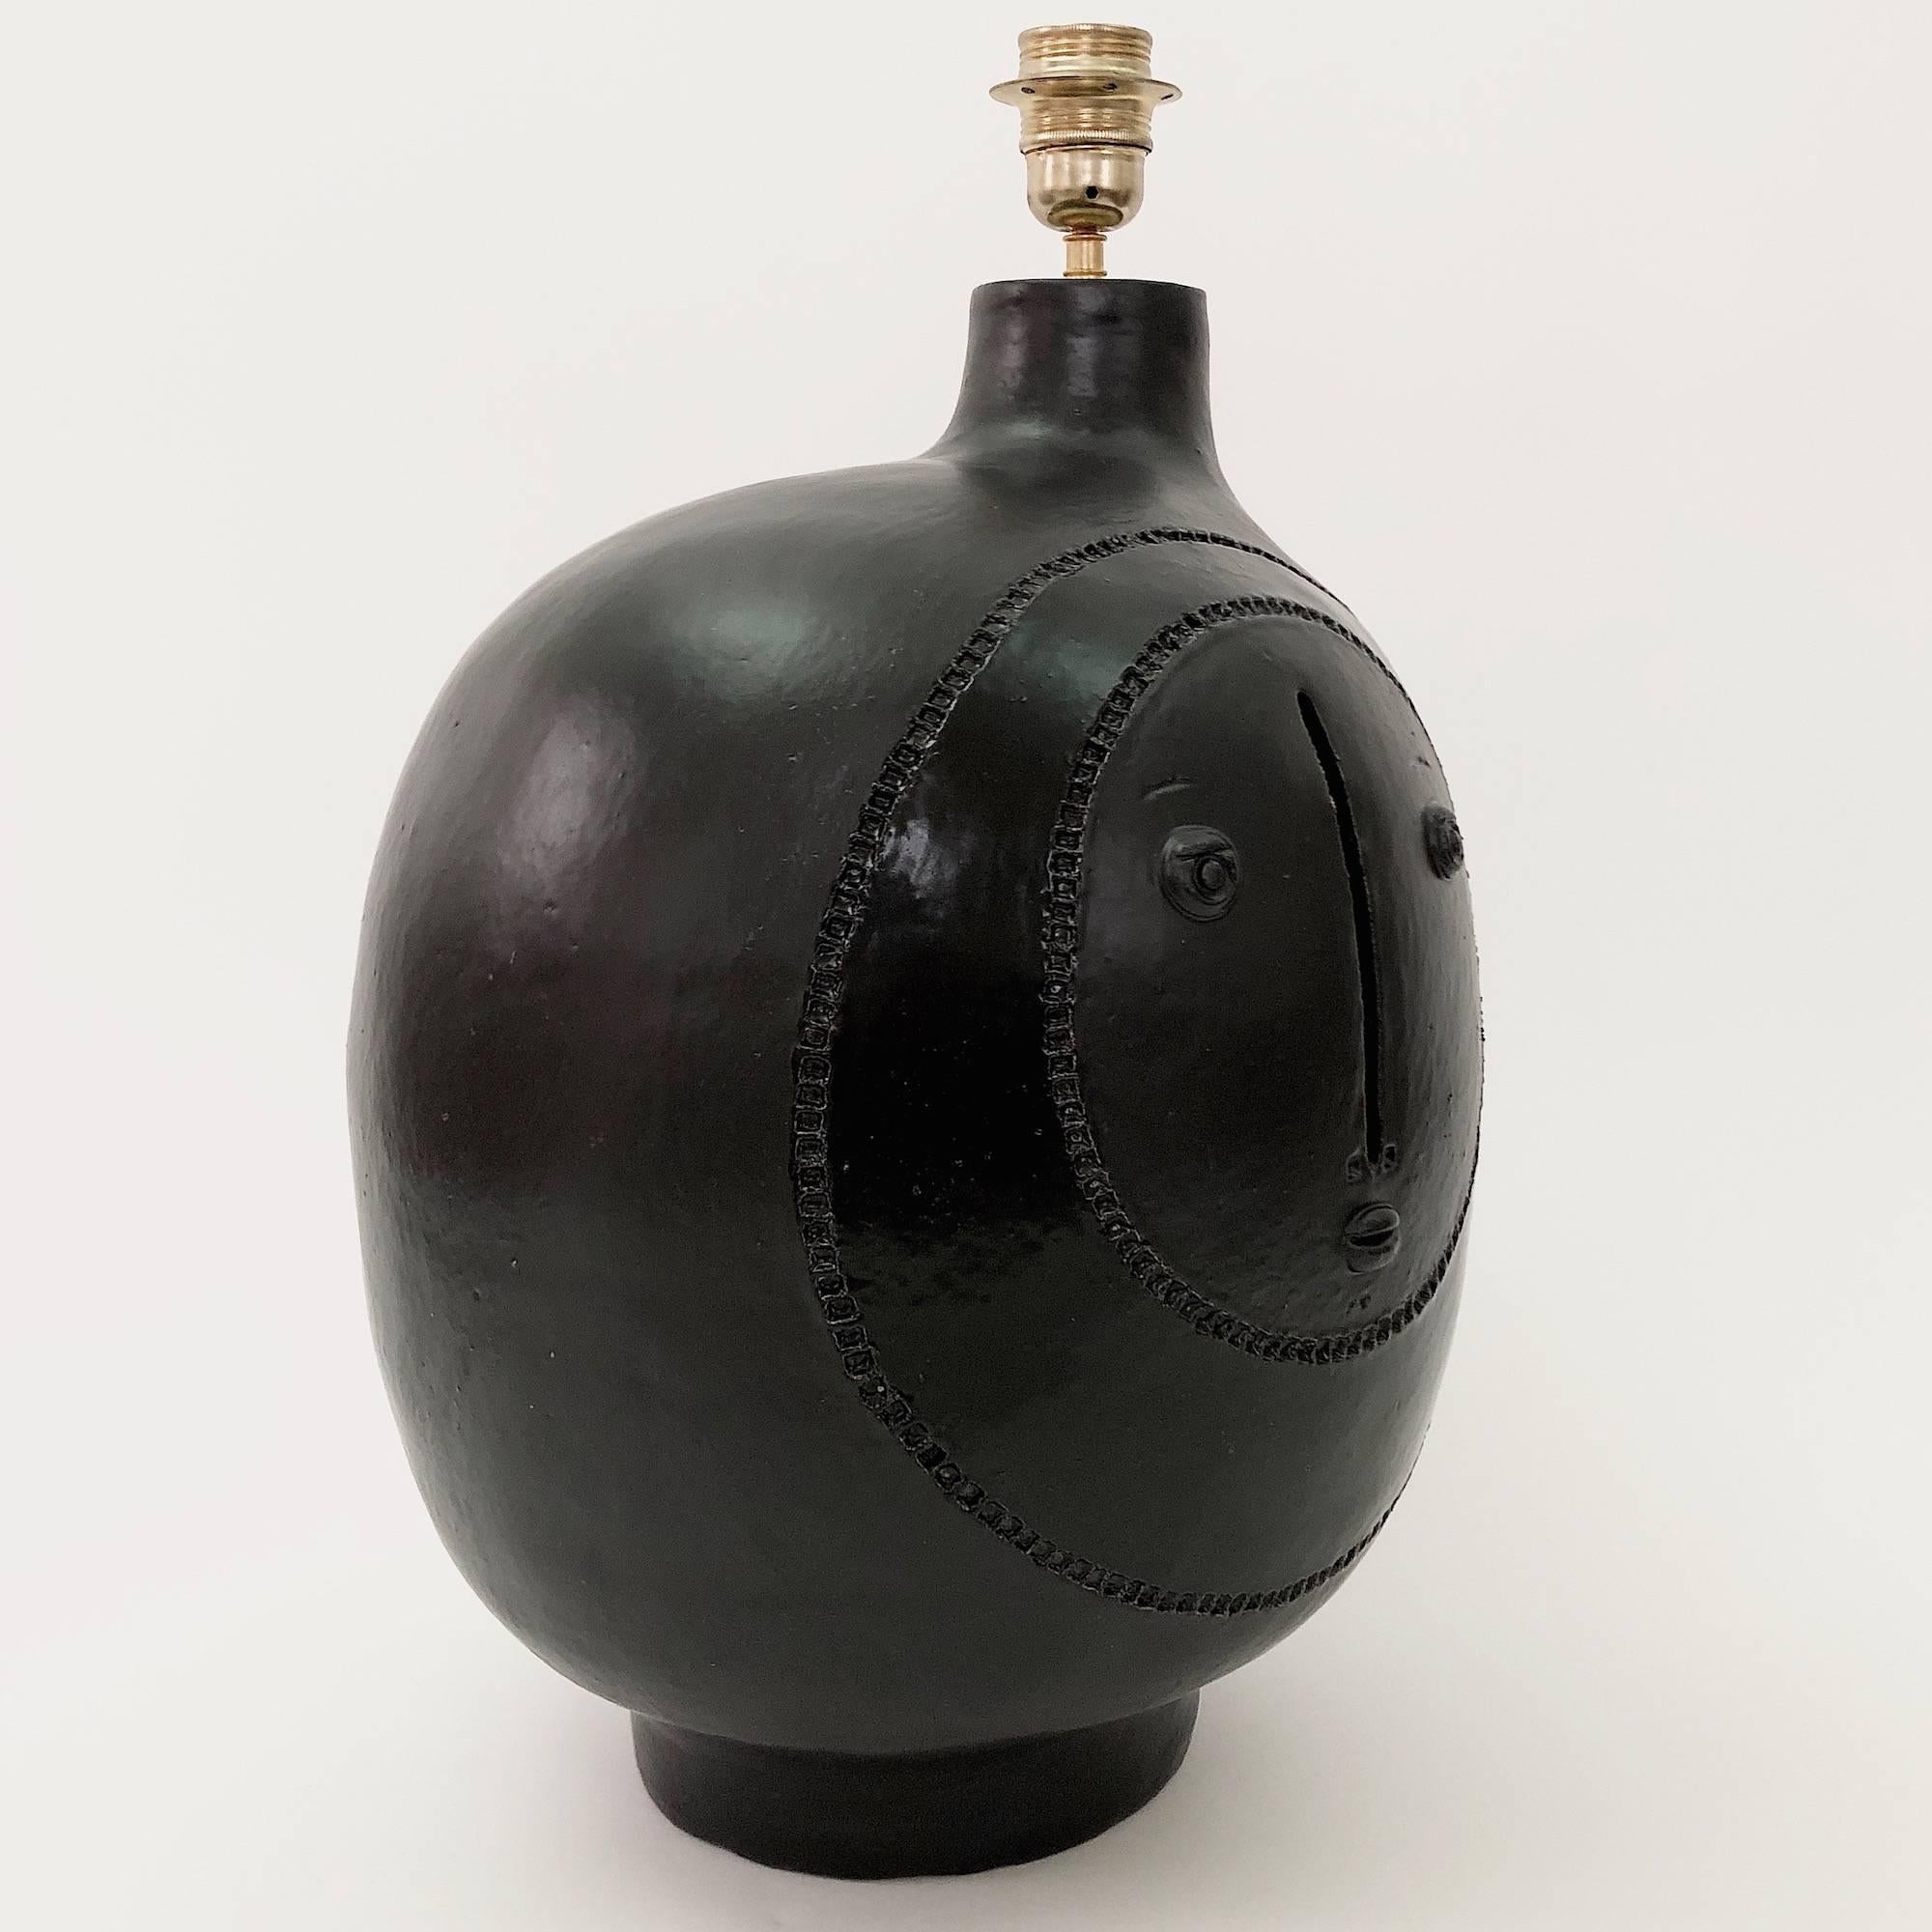 Important sculptural pottery piece forming large table lamp base.
Ceramic glazed in matte and shiny black, decorated with a stylized visage engraved in front.
One of a kind handmade piece signed by the French artists ceramicists: Dalo. 

Dimensions